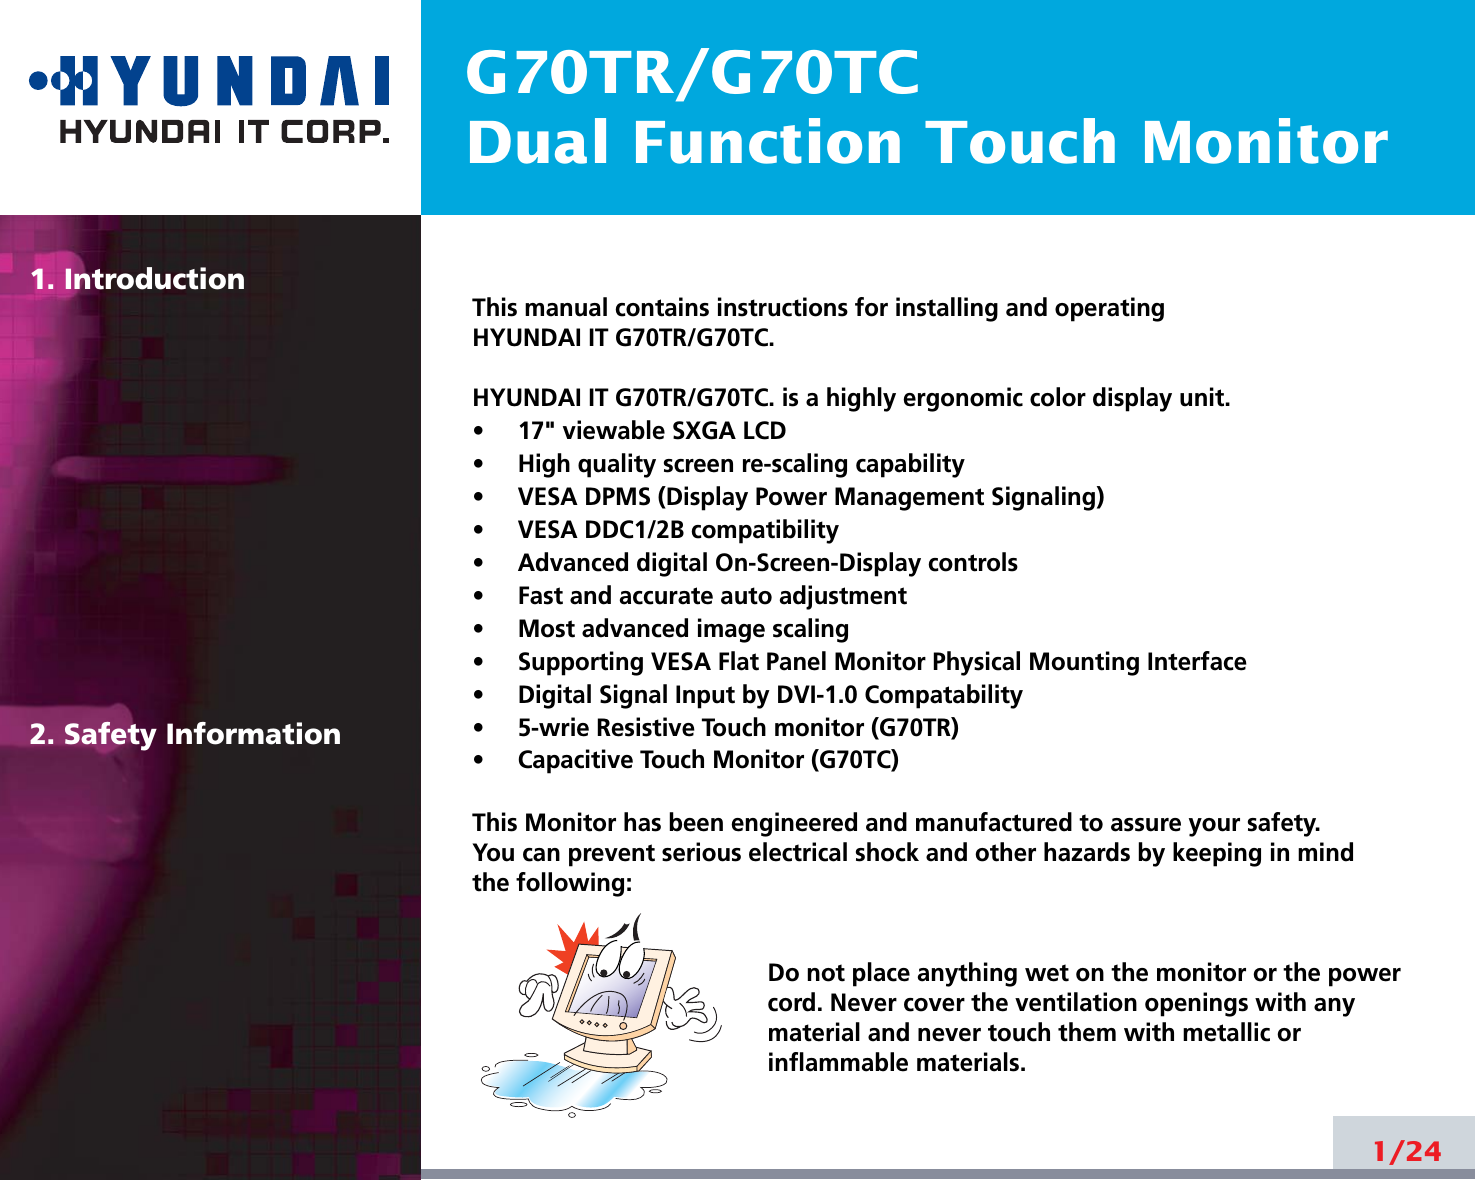 G70TR/G70TCDual Function Touch Monitor1. Introduction2. Safety Information1/24This manual contains instructions for installing and operatingHYUNDAI IT G70TR/G70TC.HYUNDAI IT G70TR/G70TC. is a highly ergonomic color display unit.•     17&quot; viewable SXGA LCD•     High quality screen re-scaling capability•     VESA DPMS (Display Power Management Signaling)•     VESA DDC1/2B compatibility•     Advanced digital On-Screen-Display controls•     Fast and accurate auto adjustment  •     Most advanced image scaling•     Supporting VESA Flat Panel Monitor Physical Mounting Interface•     Digital Signal Input by DVI-1.0 Compatability•     5-wrie Resistive Touch monitor (G70TR)•     Capacitive Touch Monitor (G70TC)This Monitor has been engineered and manufactured to assure your safety. You can prevent serious electrical shock and other hazards by keeping in mind the following:Do not place anything wet on the monitor or the powercord. Never cover the ventilation openings with anymaterial and never touch them with metallic or inflammable materials.